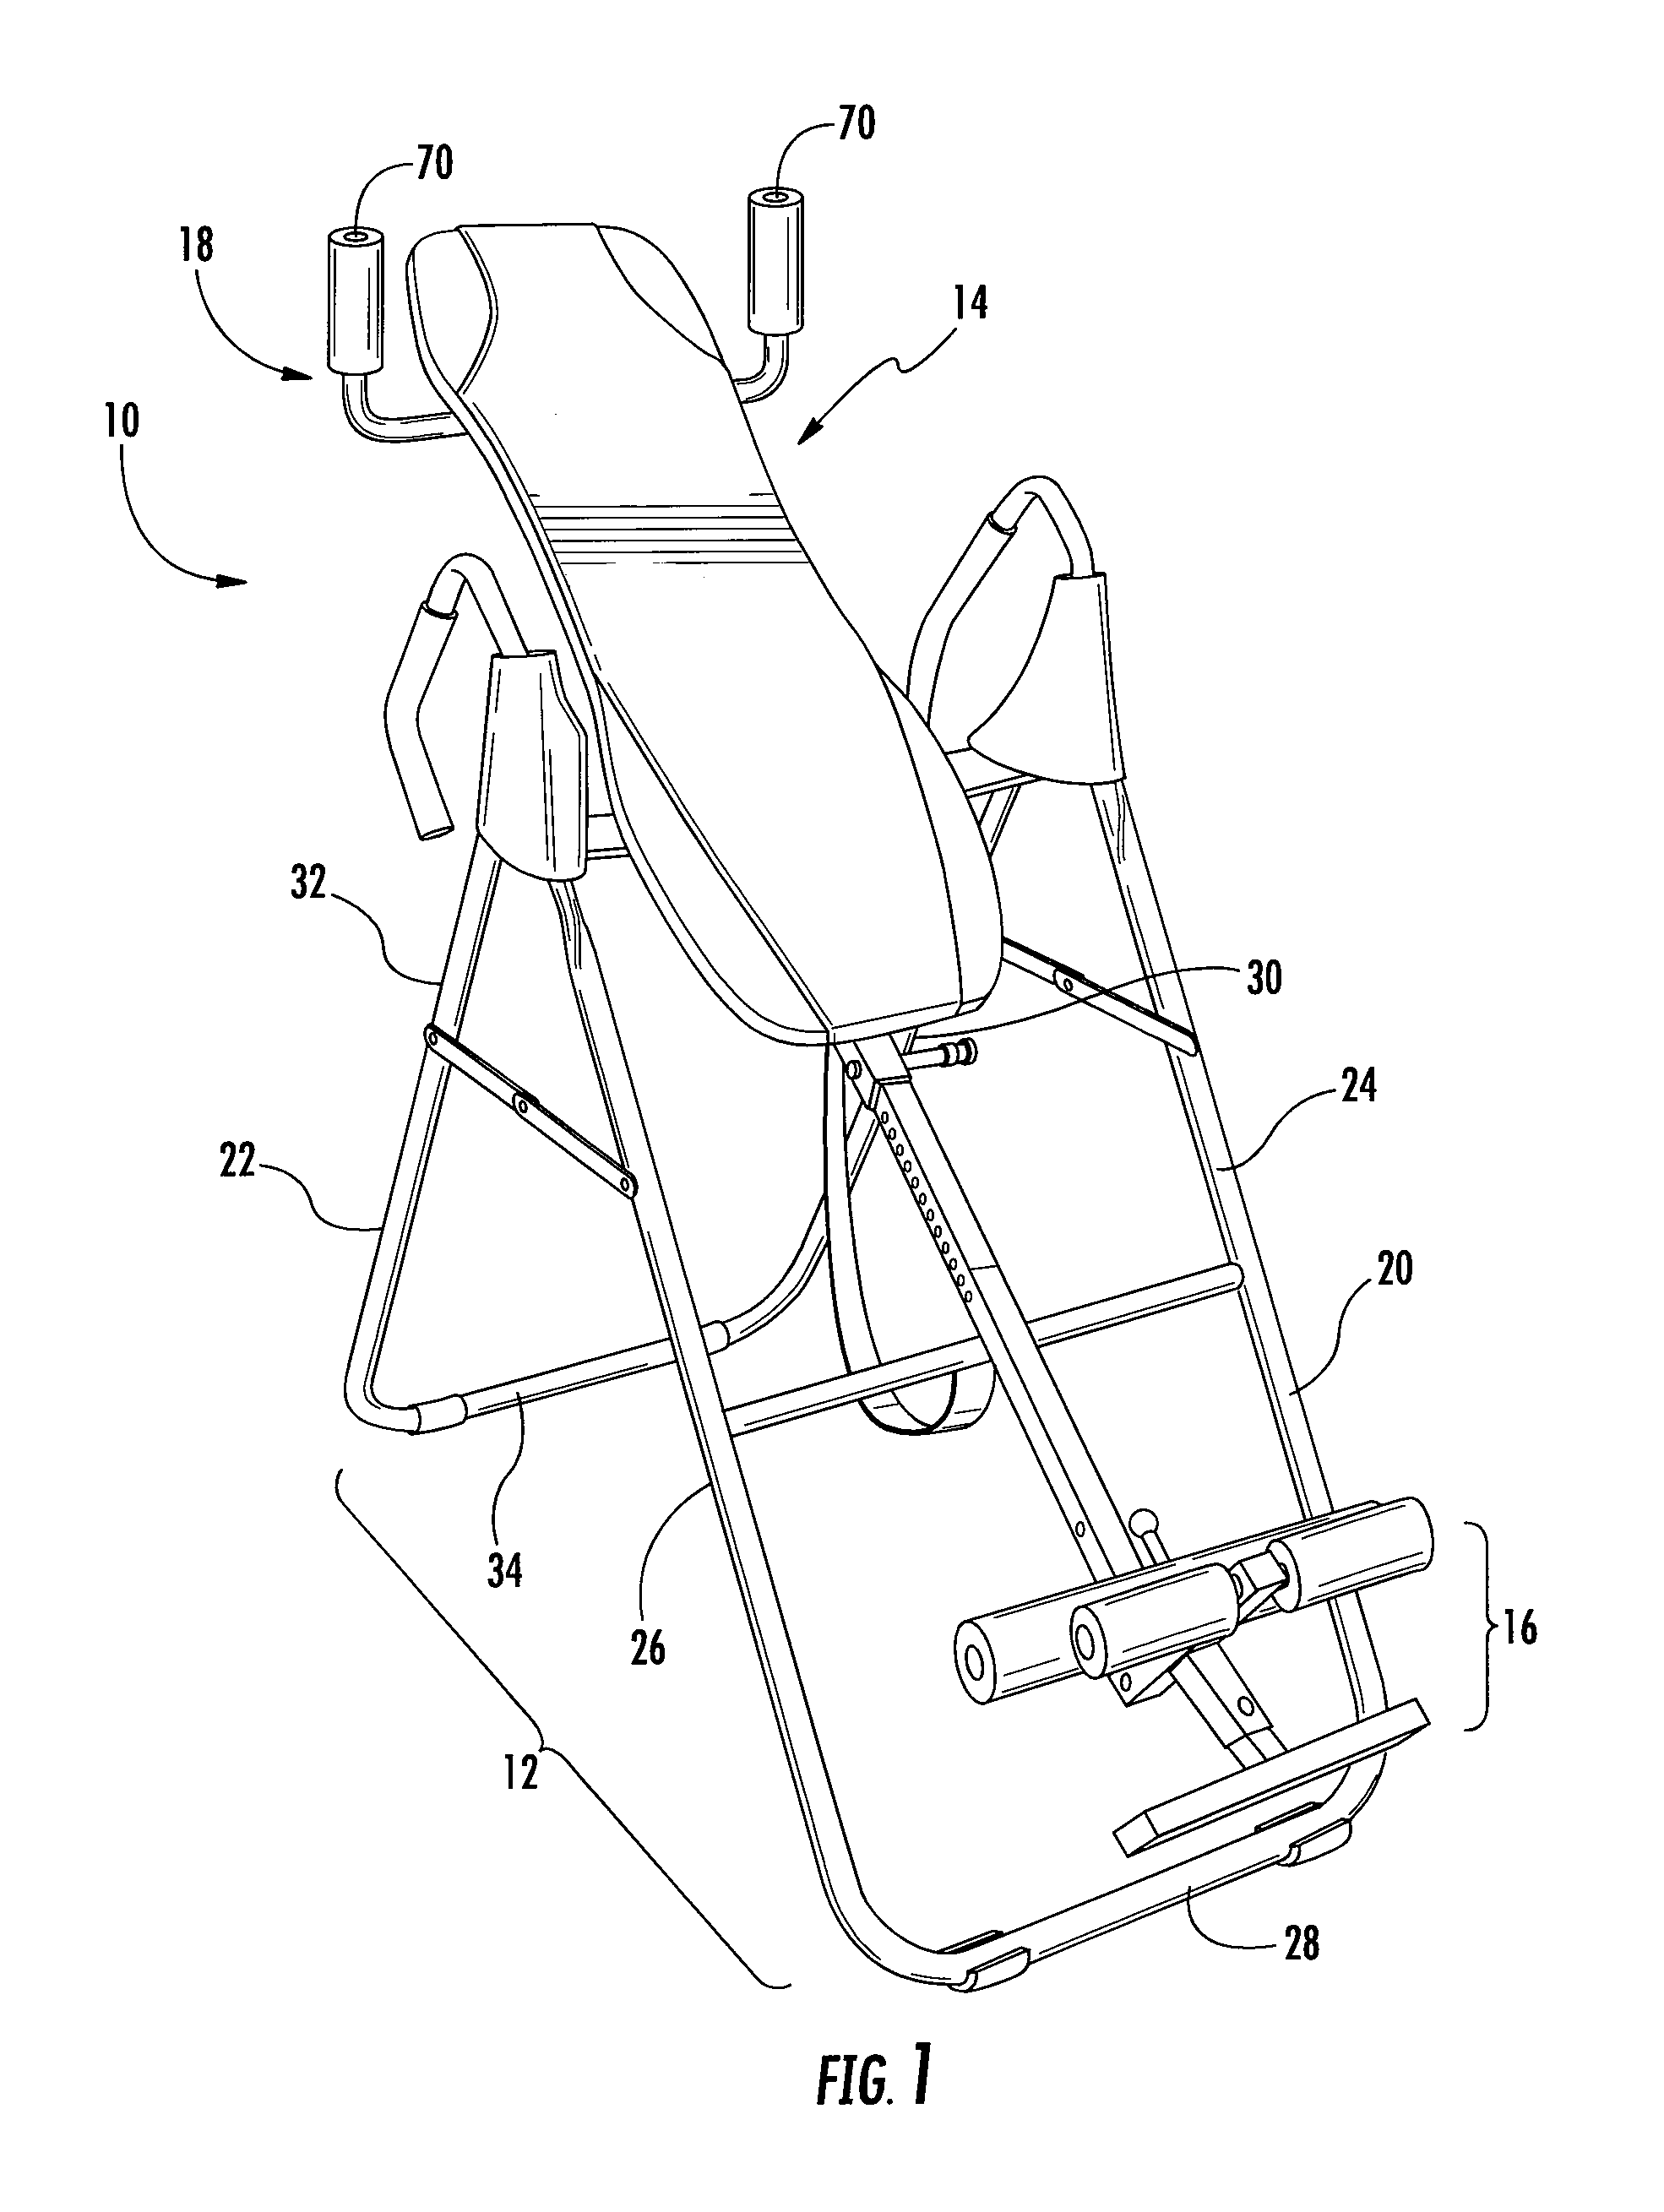 Inversion table with neck support